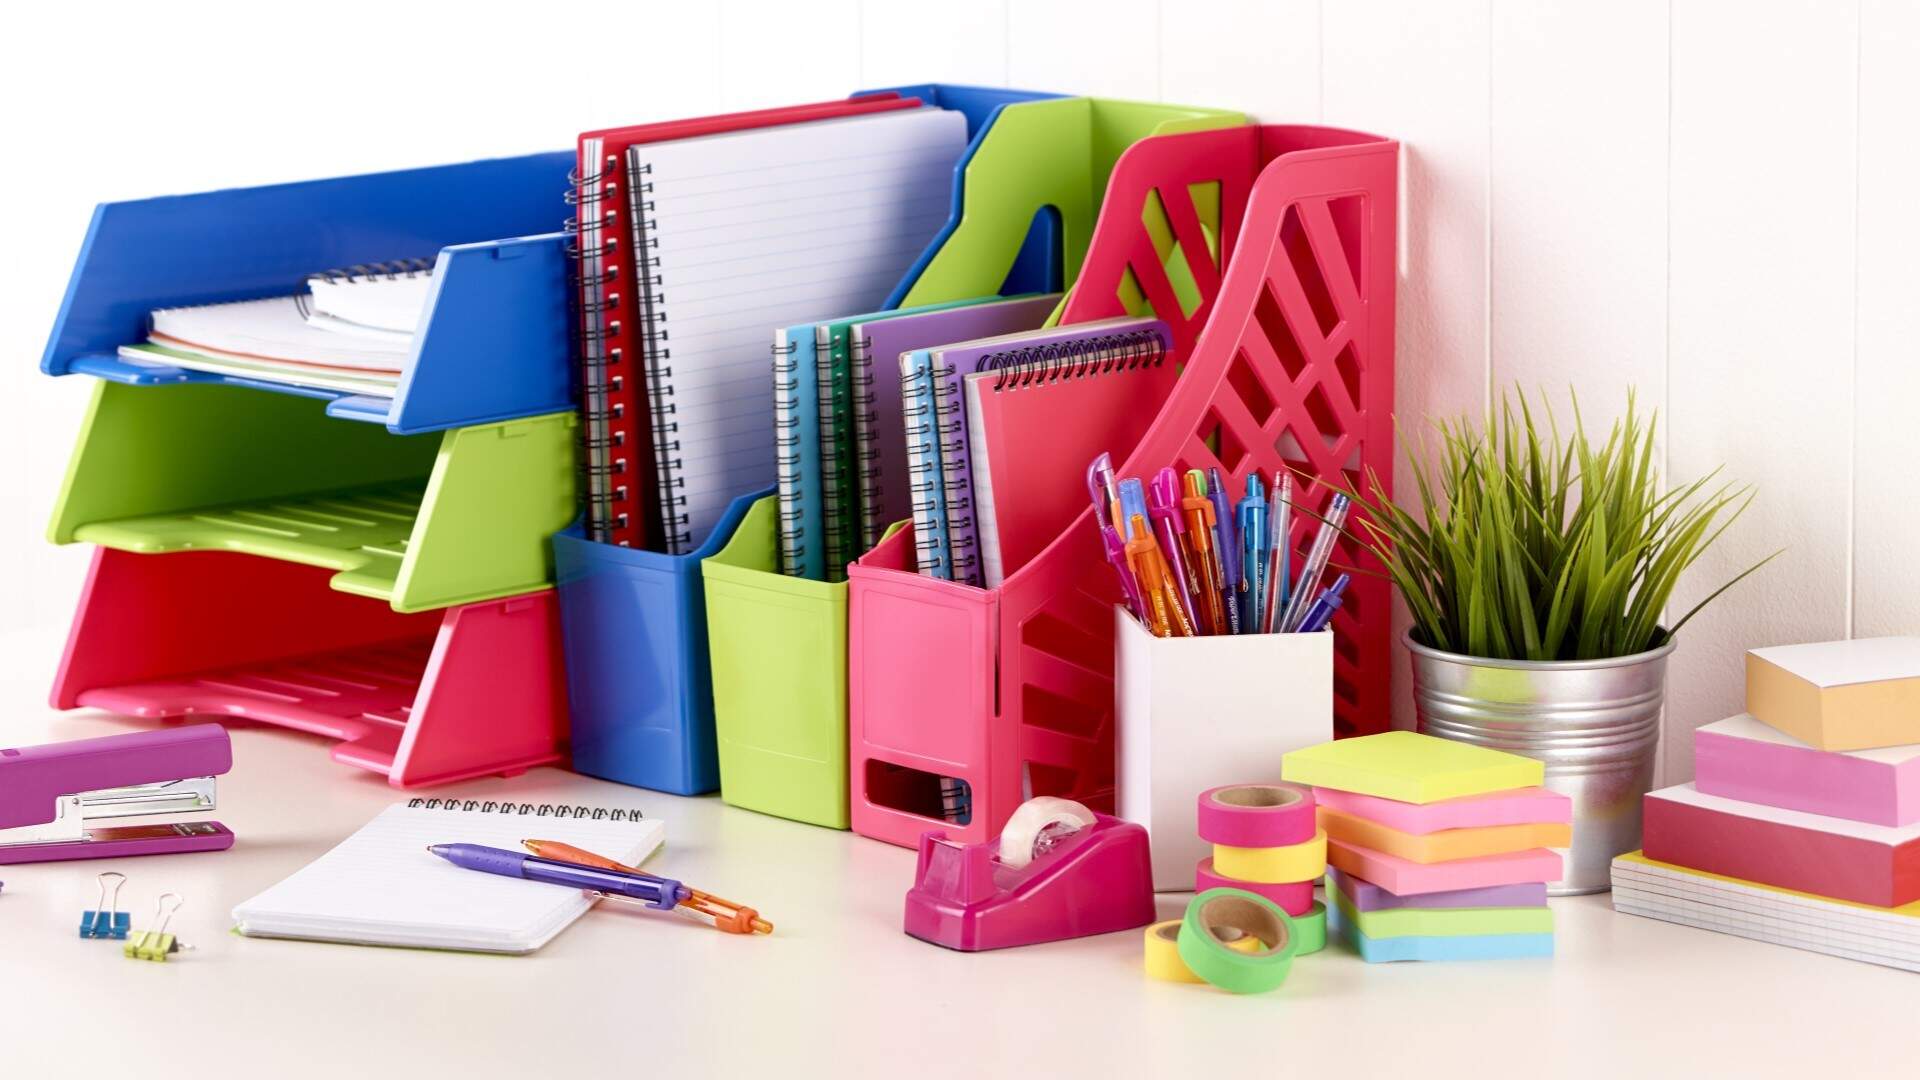 Vibrant coloured office organisers and desk set up